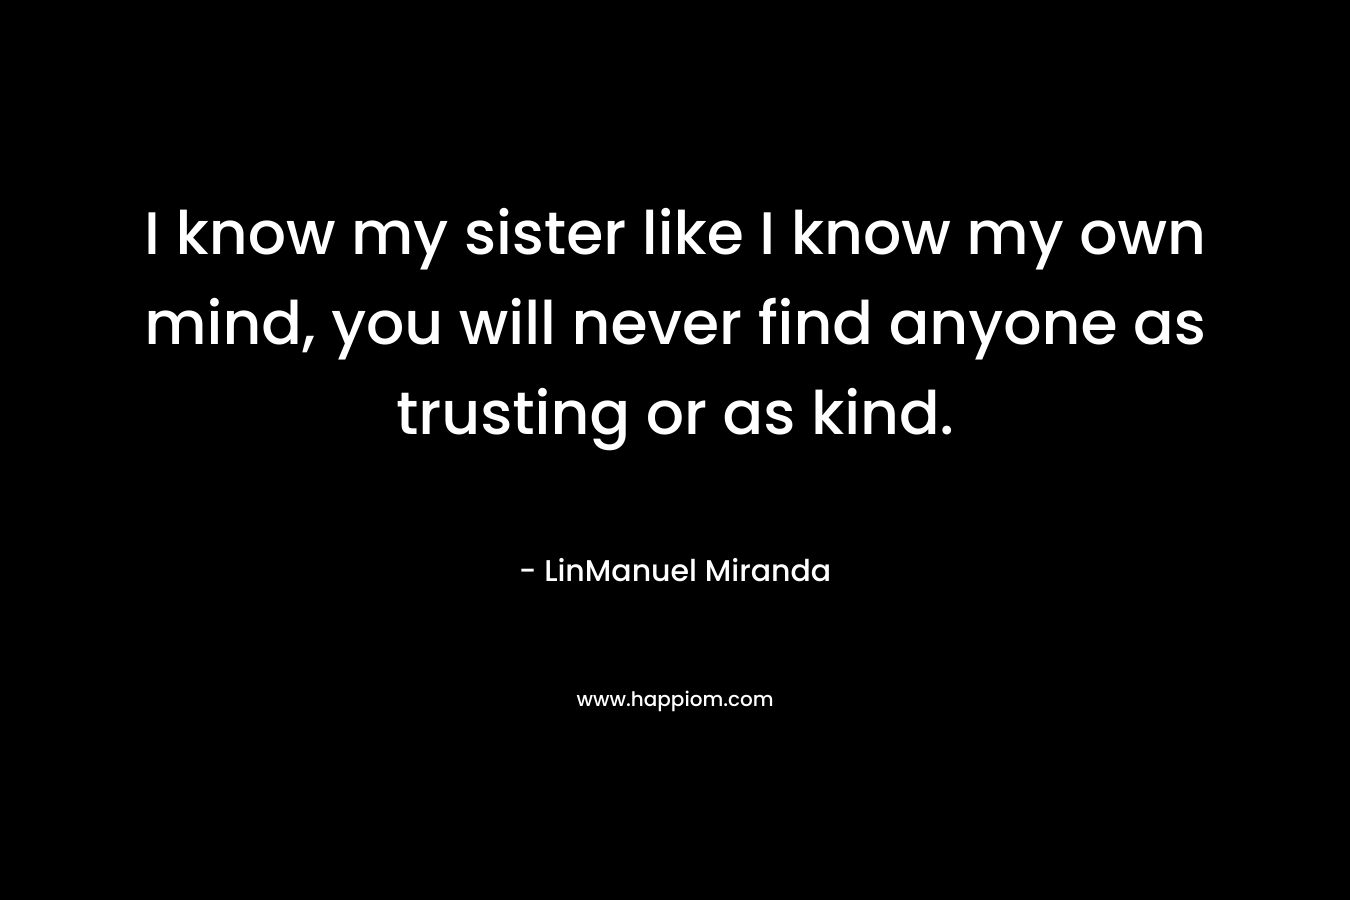 I know my sister like I know my own mind, you will never find anyone as trusting or as kind.